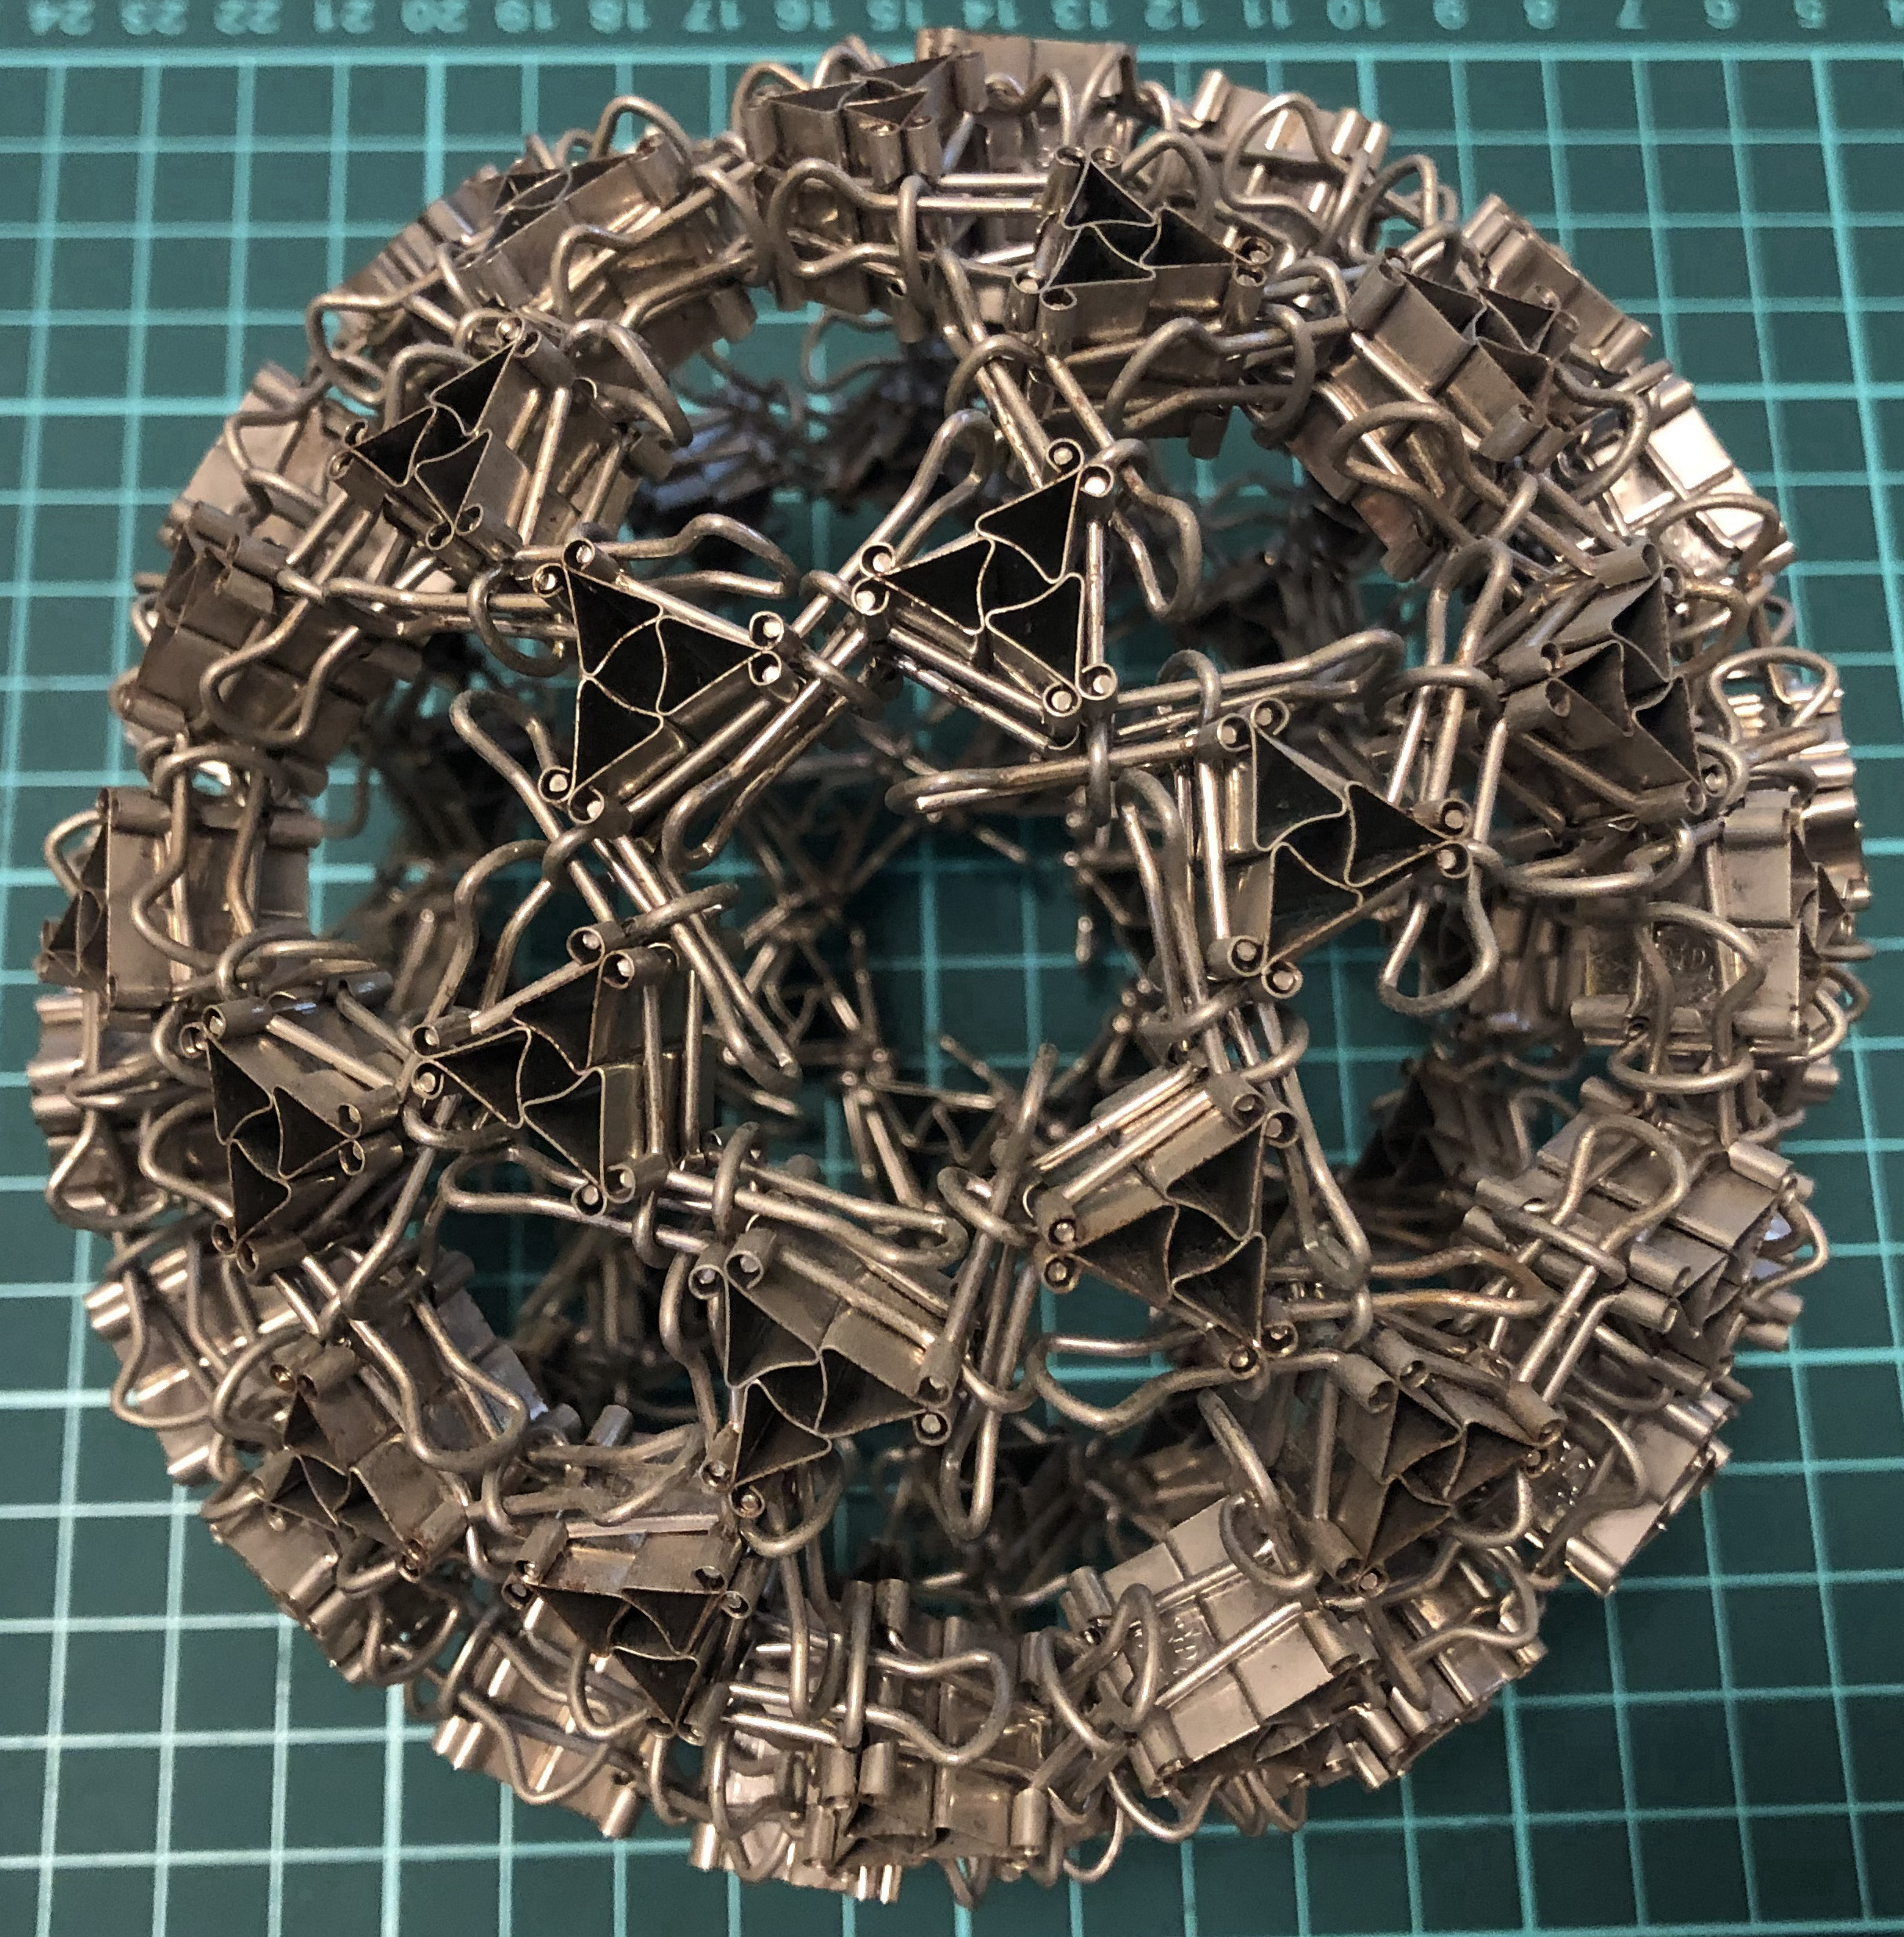 60 clips forming 30 Δ-vertices forming truncated icosahedron